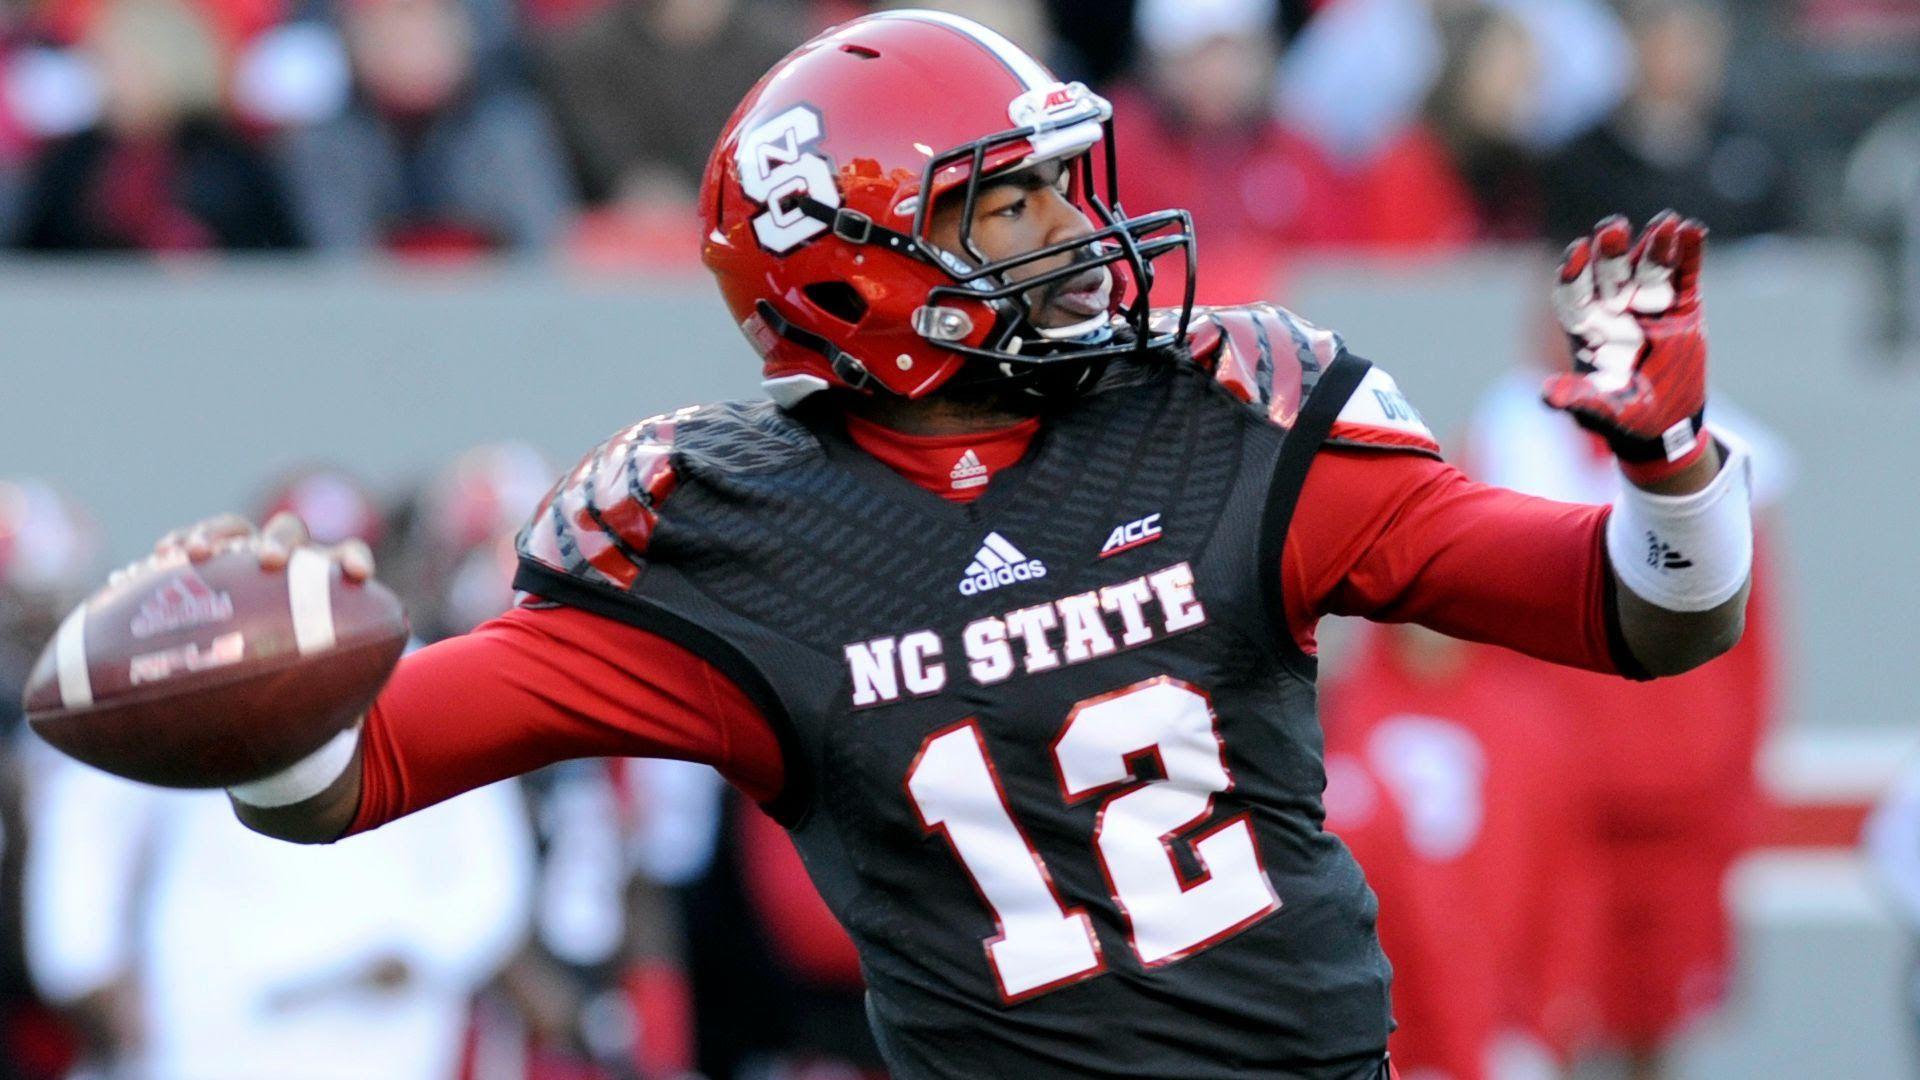 NC State QB Jacoby Brissett Hype Video